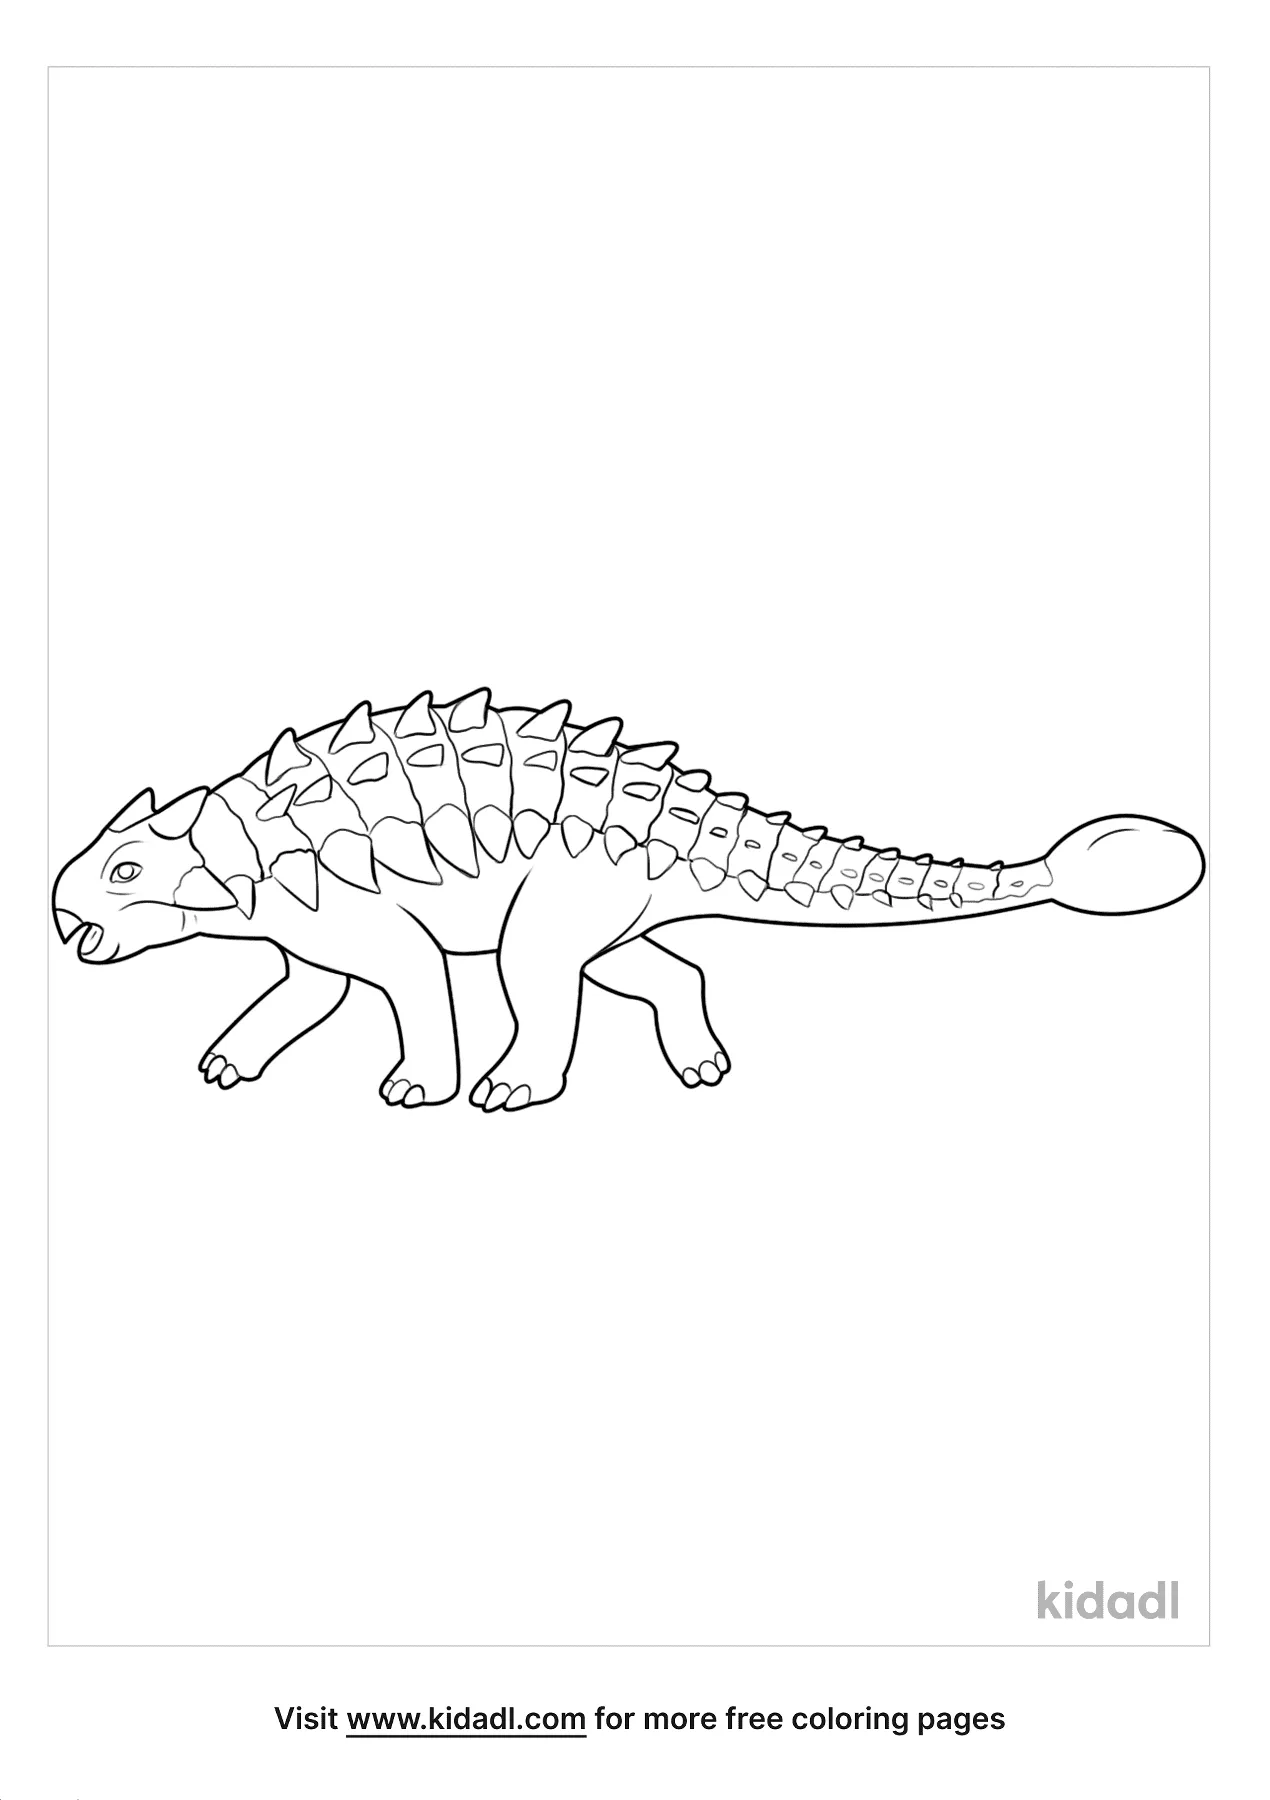 Ankylosaurus Coloring Pages Free Dinosaurs Coloring Pages Kidadl